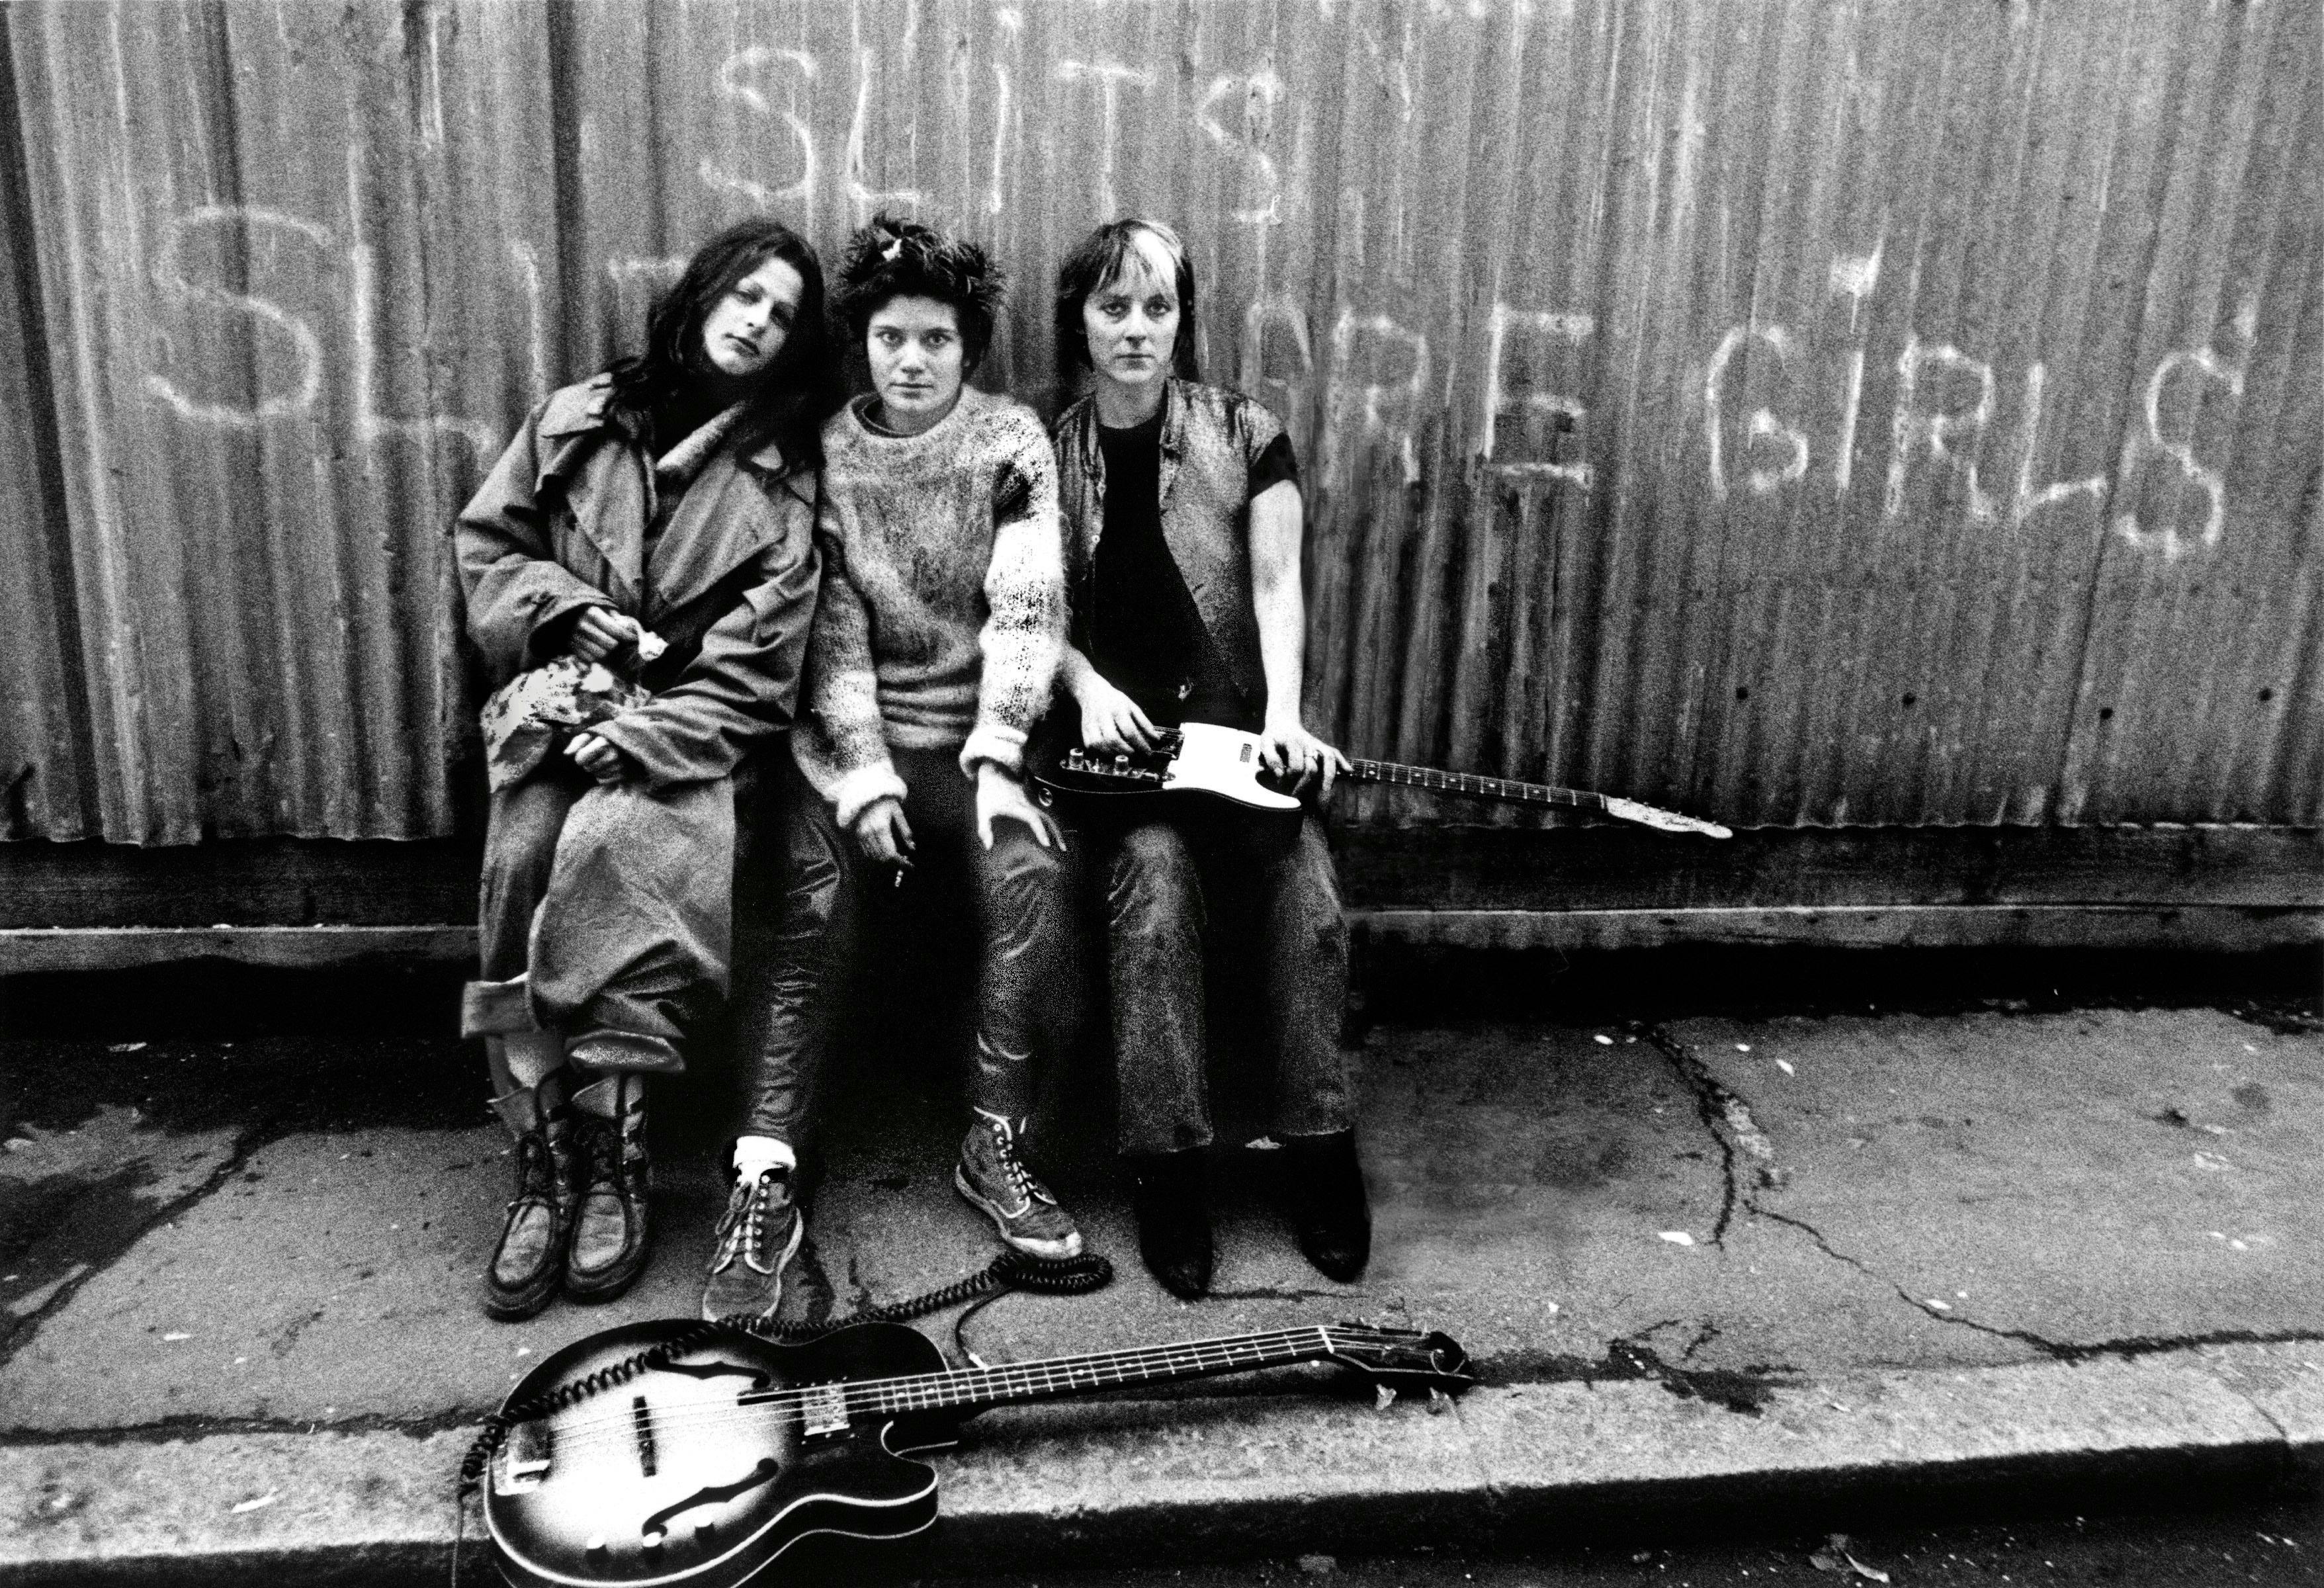 1977 huty 19484 huty19484 huty1948433 bass guitar black and white day drummer electric guitar fence full length grafitti guitarist looking at camera only women outdoors pop musician punk rock singer sitting street the slits three people western script person human guitar musical instrument leisure activities